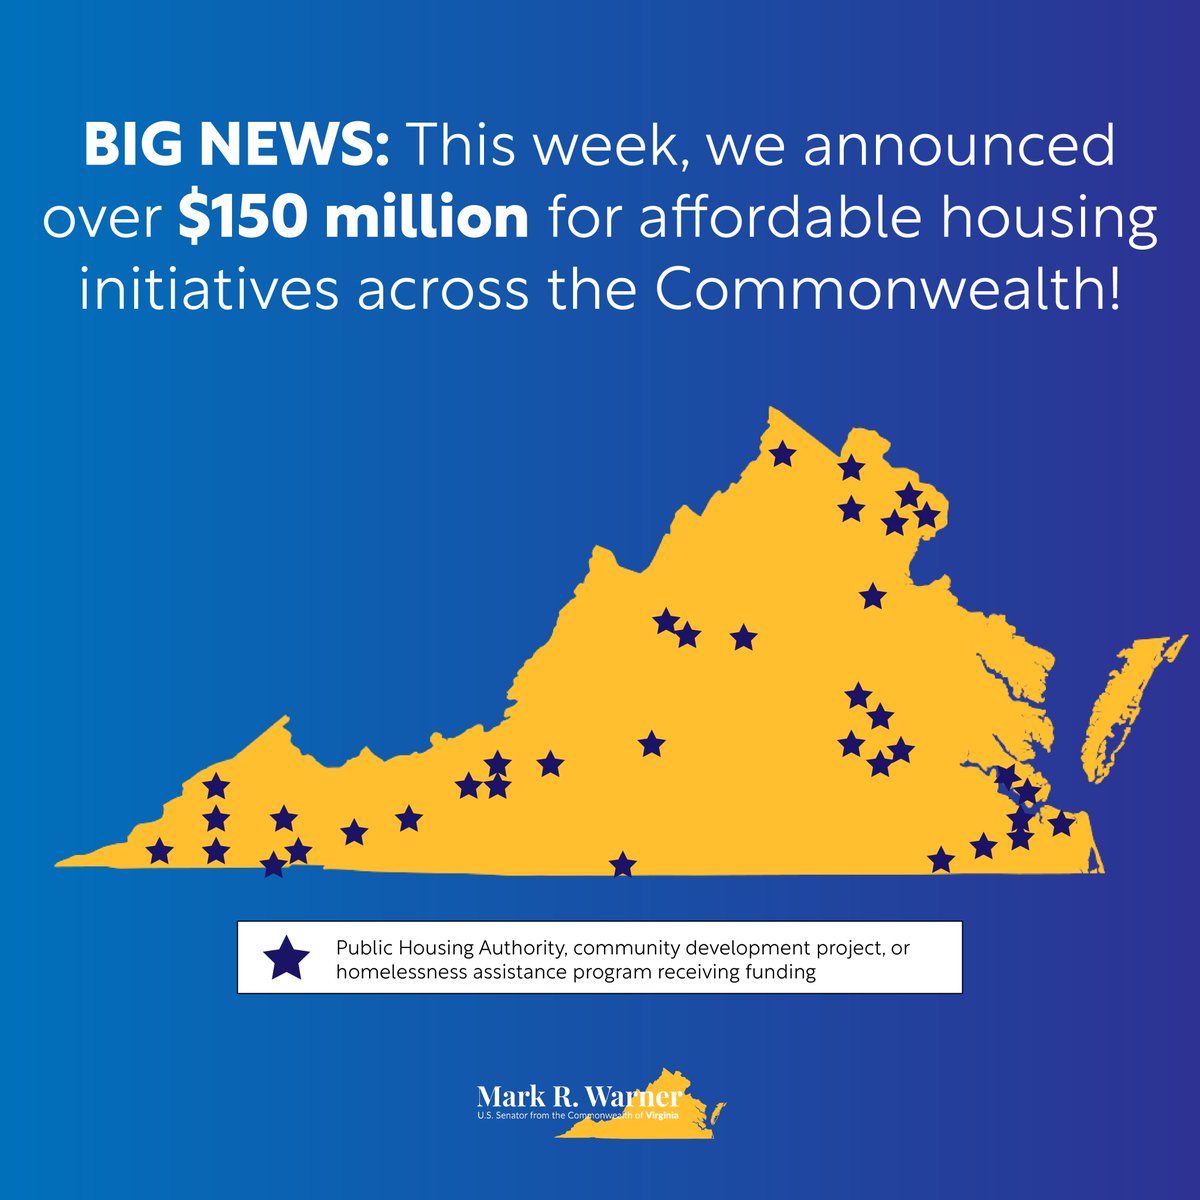 The lack of affordable housing is nothing short of a crisis. This week, I announced funding to every corner of the Commonwealth to address that.